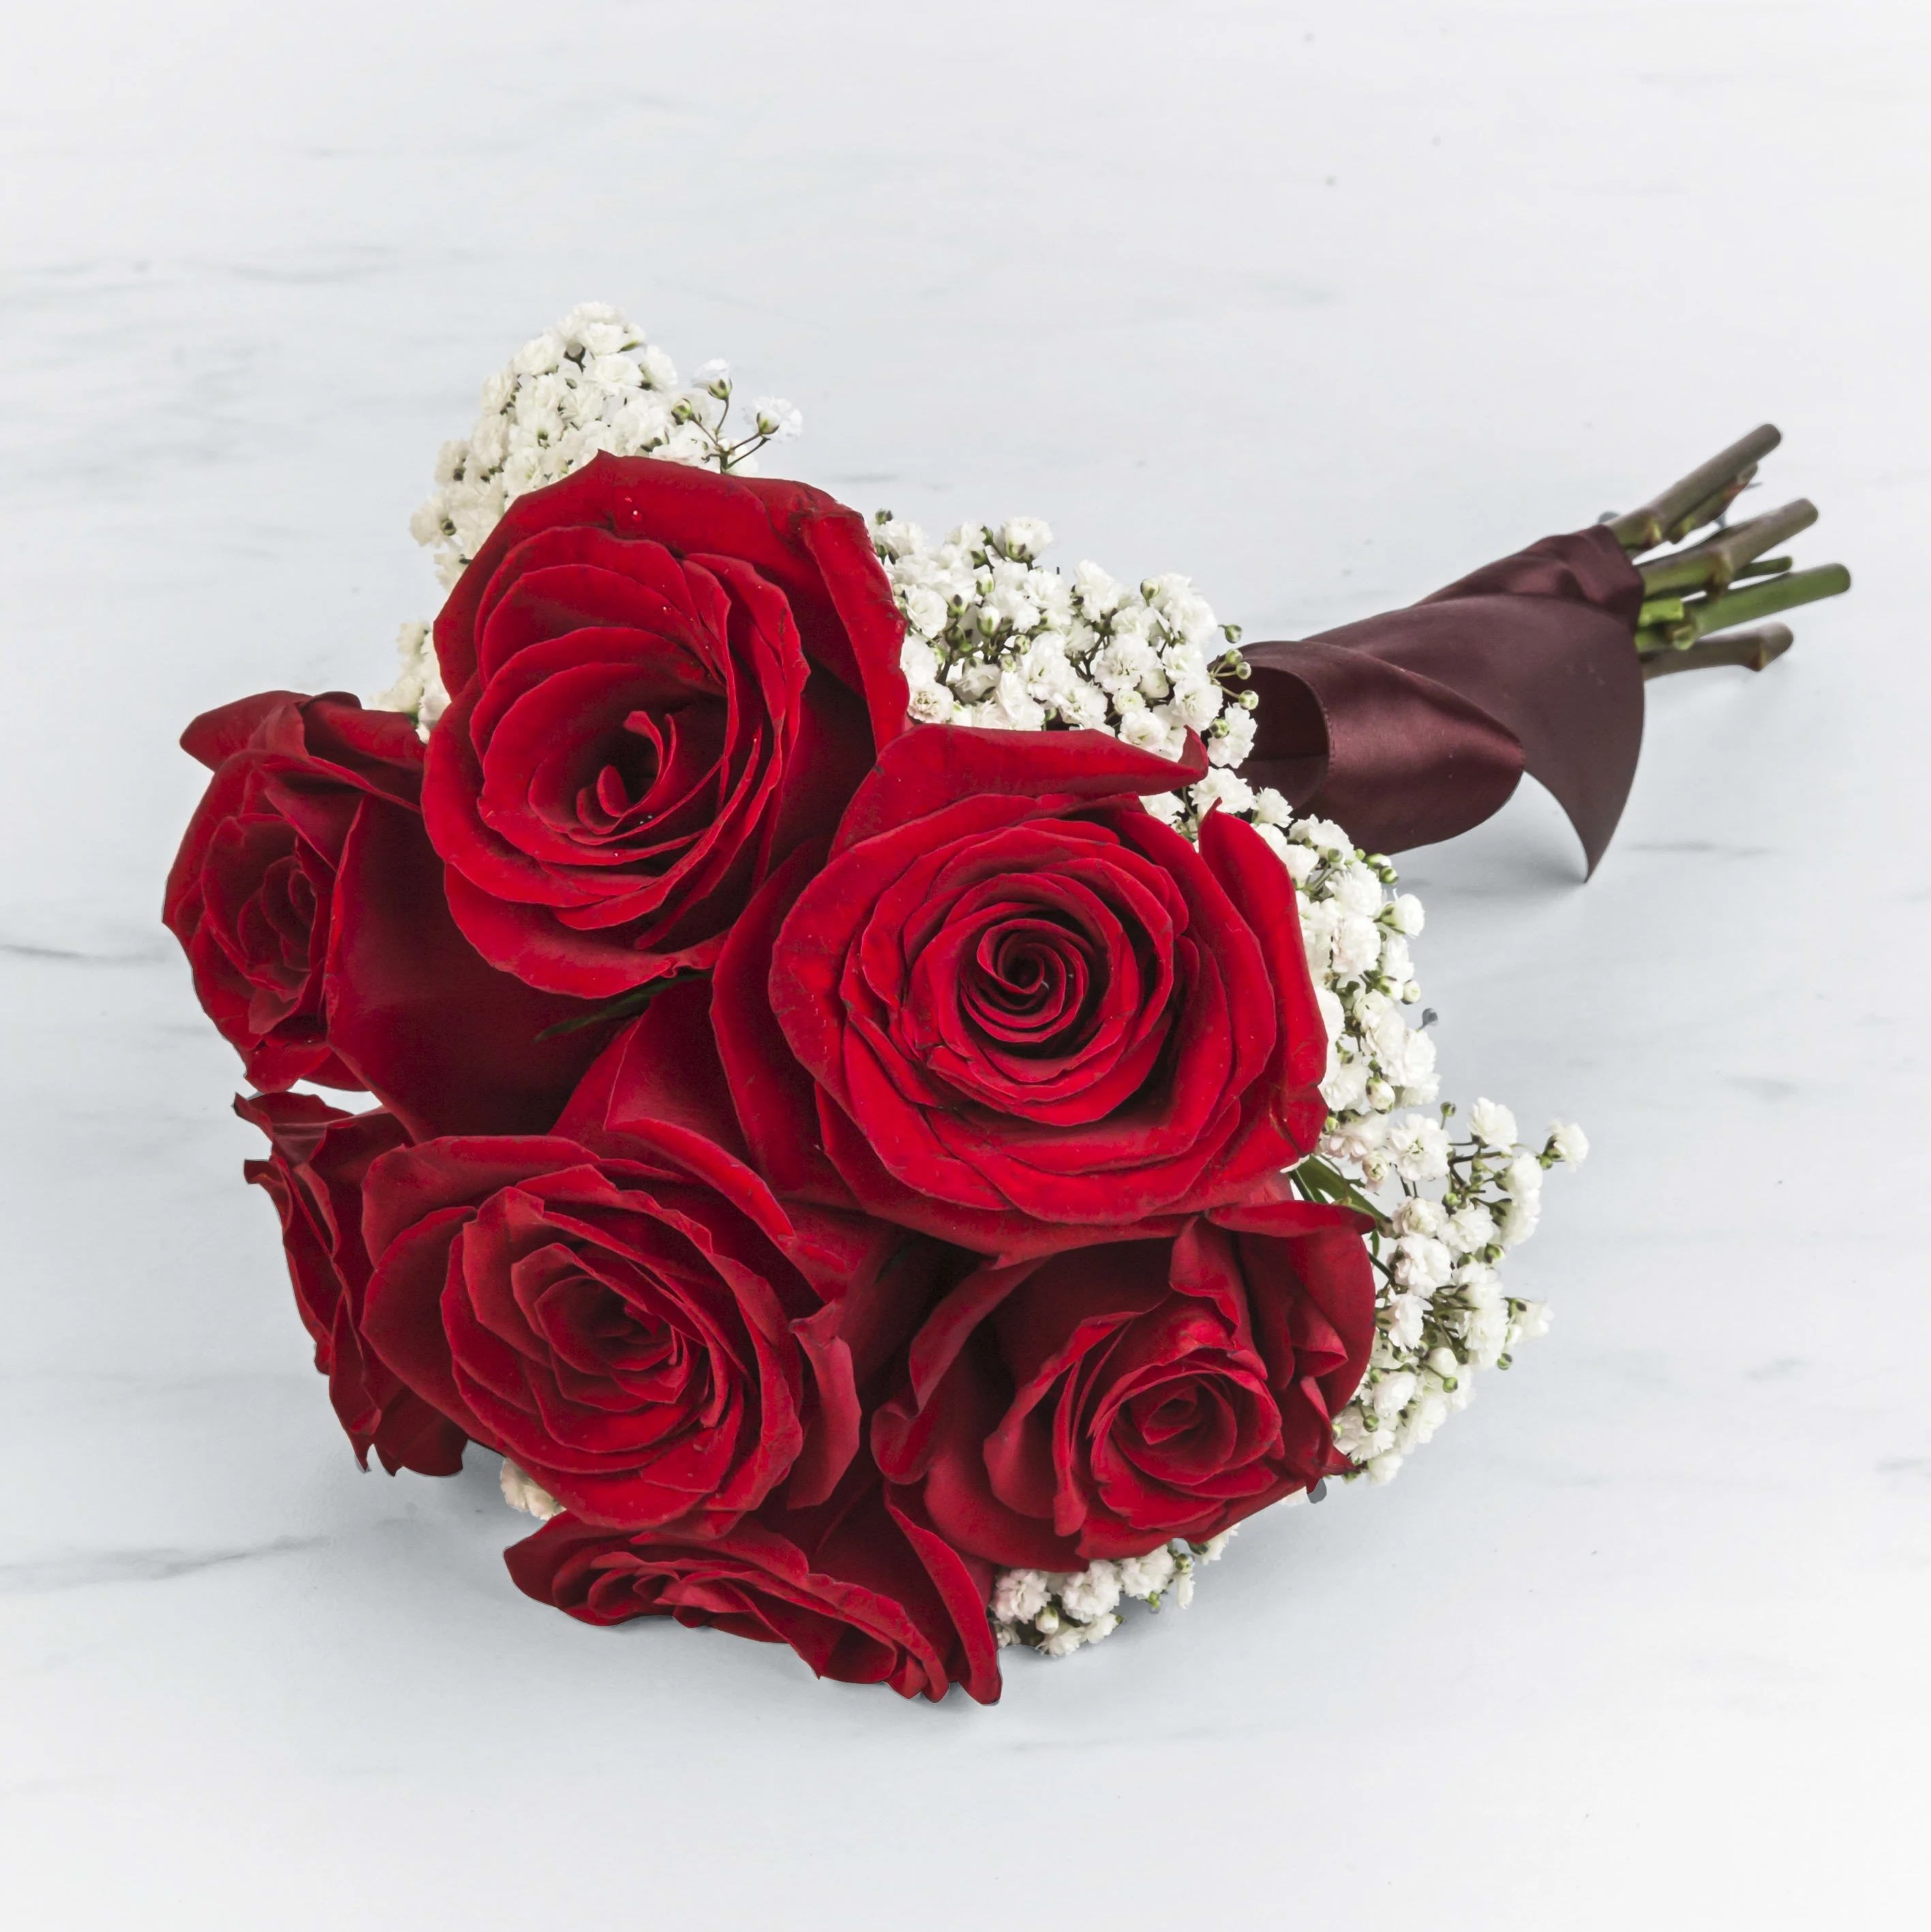 Small and Petite Red Rose Bouquet in Fresh Meadows, NY